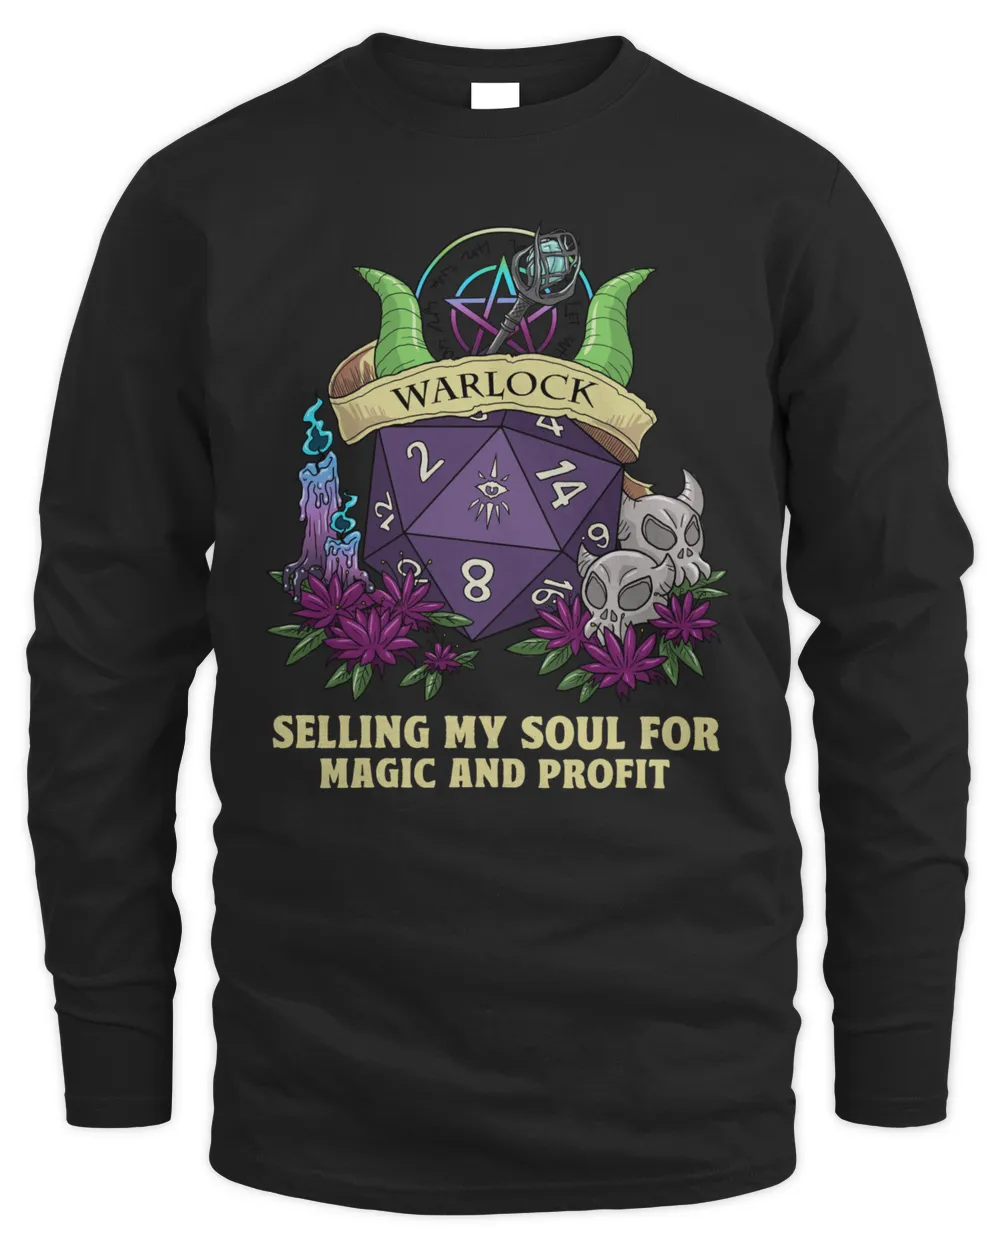 Warlock Selling My Soul For Magic And Profit, Dungeons and Dragons, DnD, RPG Gift, Dungeon Master Shirt Men's Long Sleeved T-Shirt black 